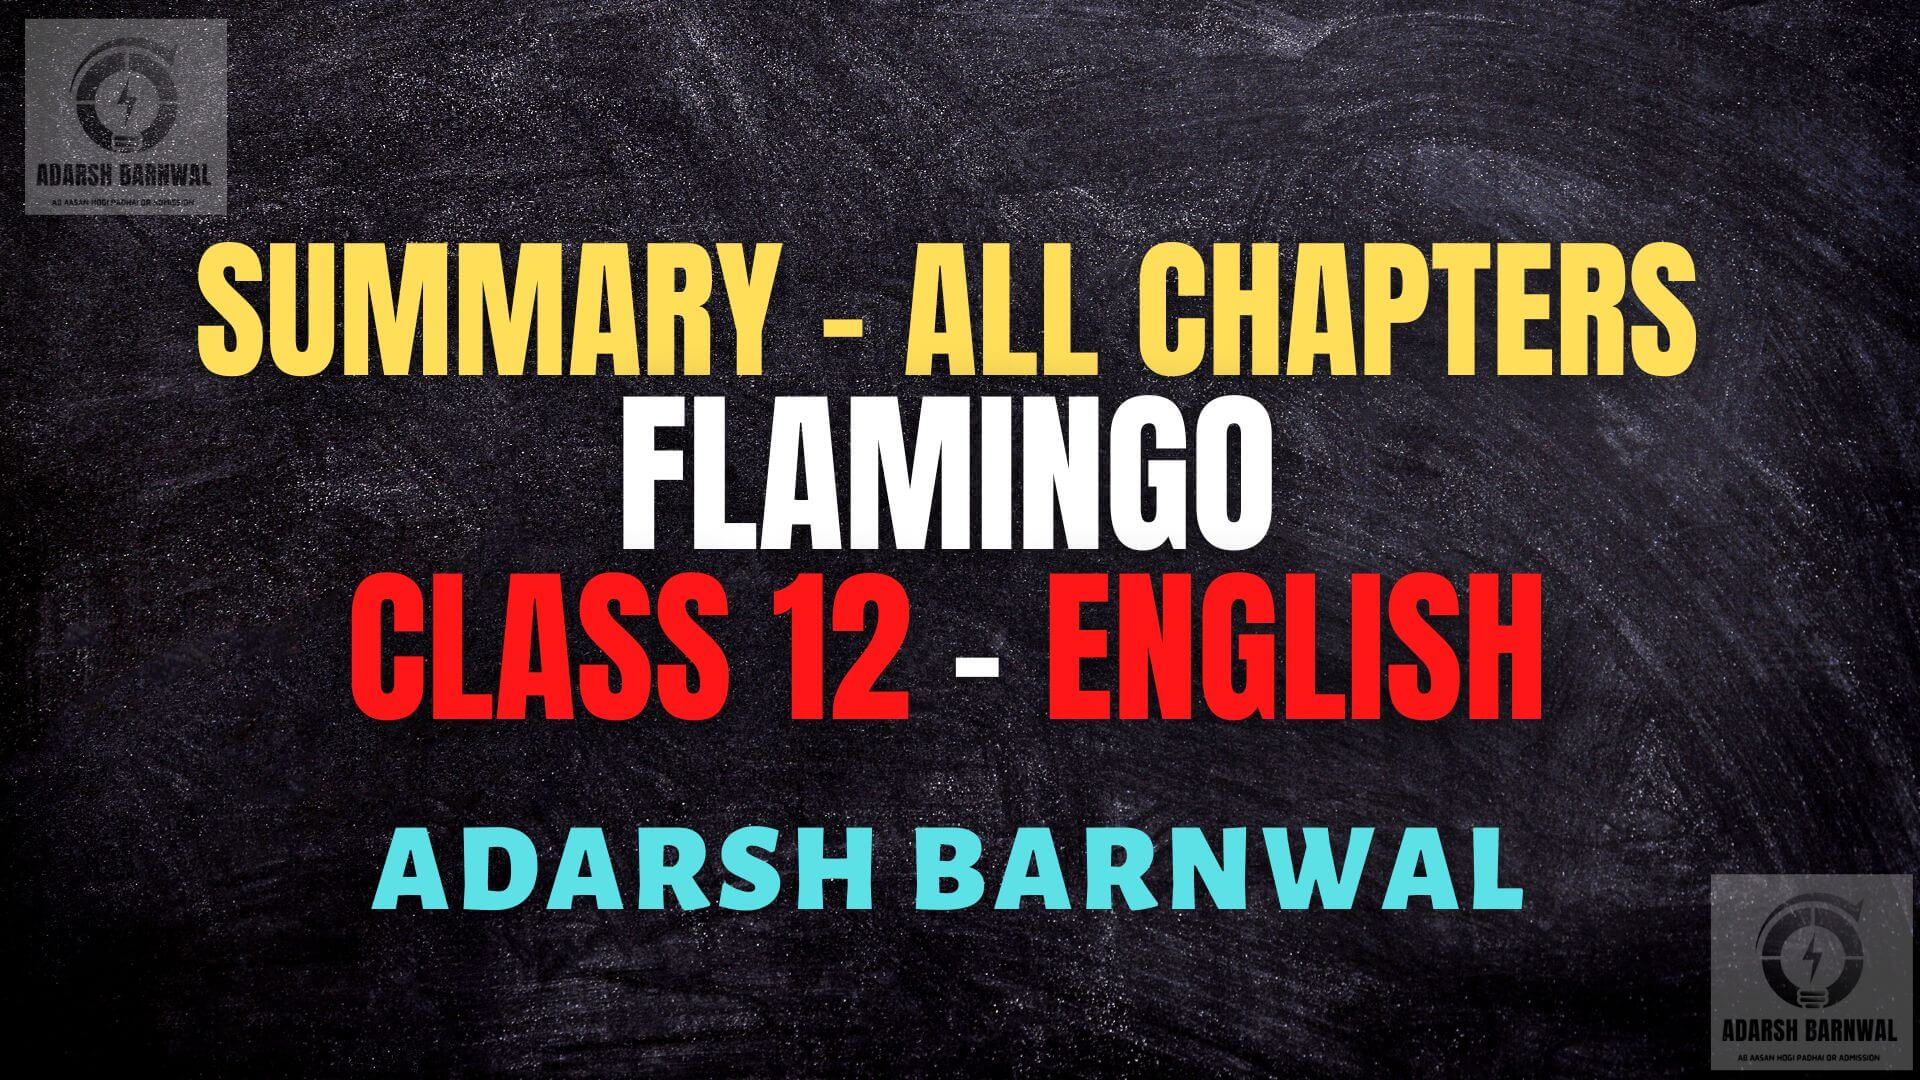 Flamingo Class 12 English all Chapters Summary Pdf by Adarsh Barnwal